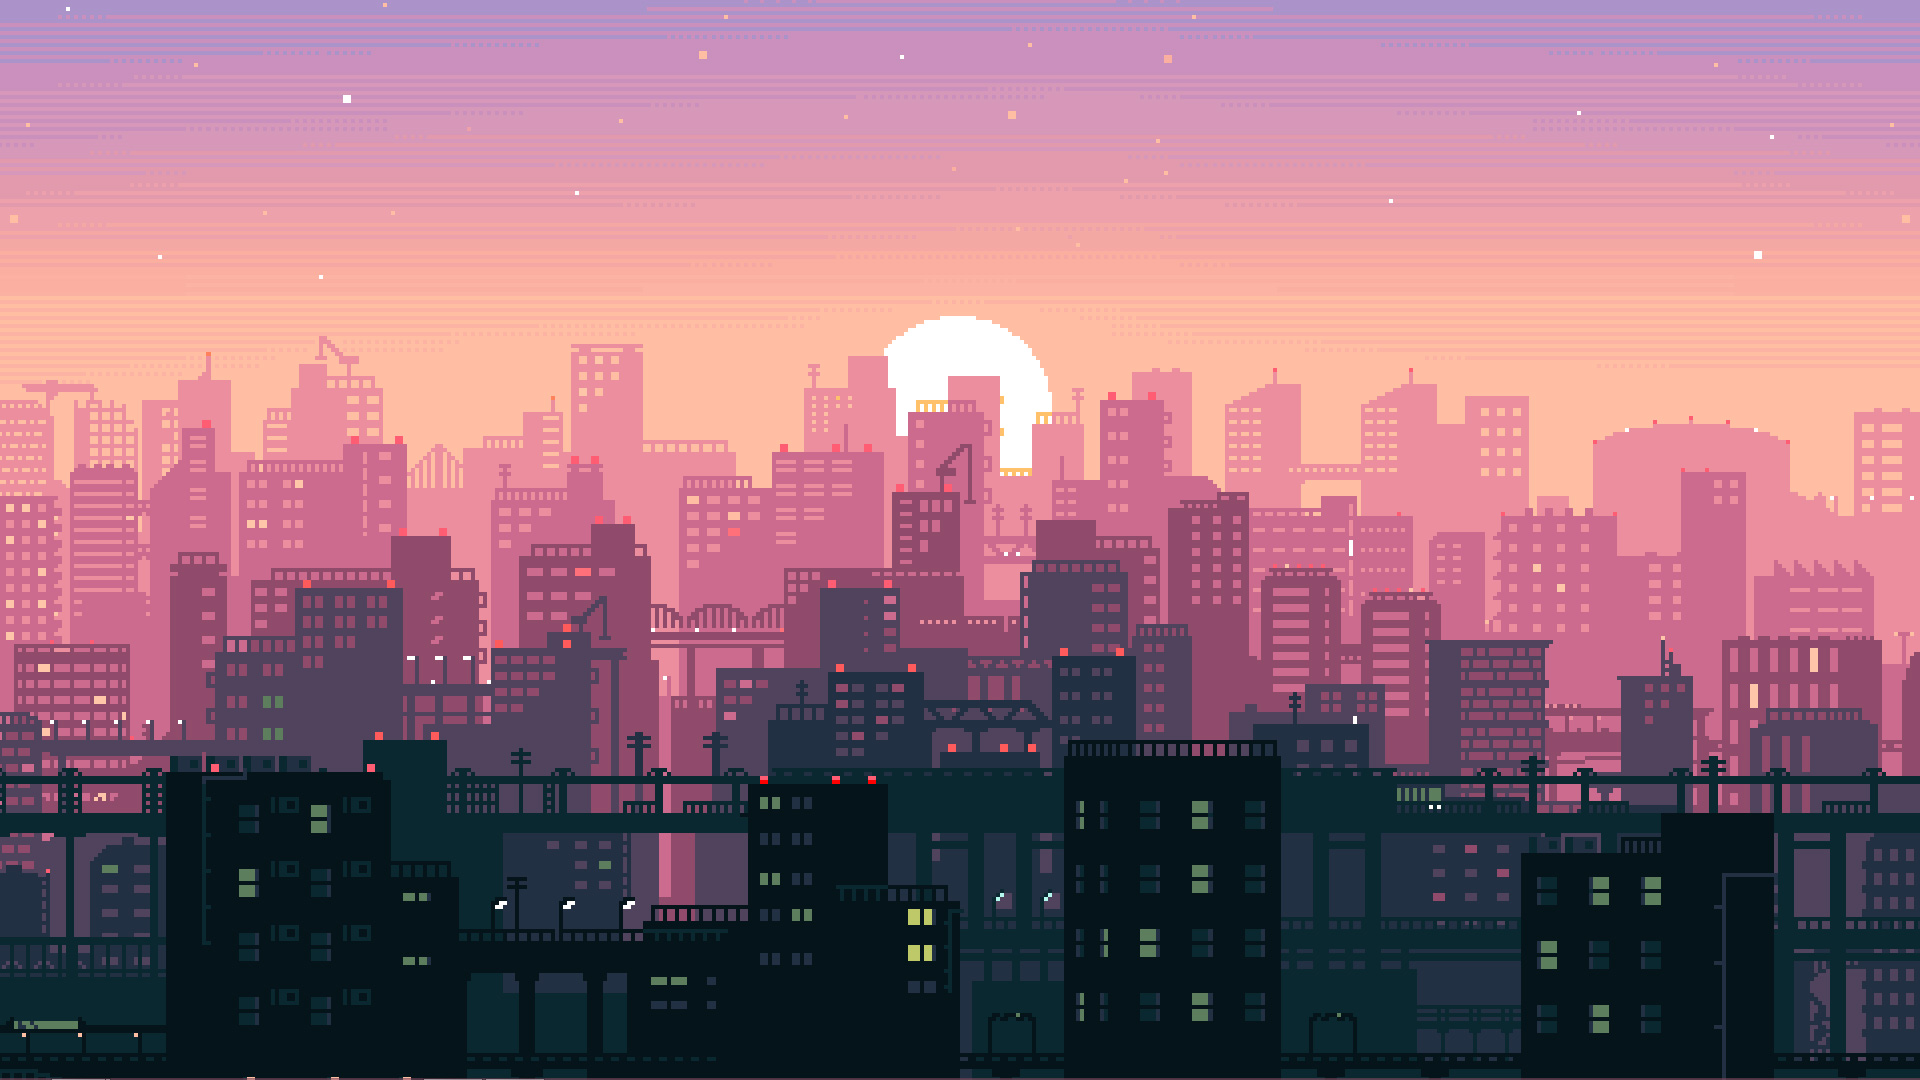 Bit Pixel Art City, HD Artist, 4k Wallpaper, Image, Background, Photo and Picture